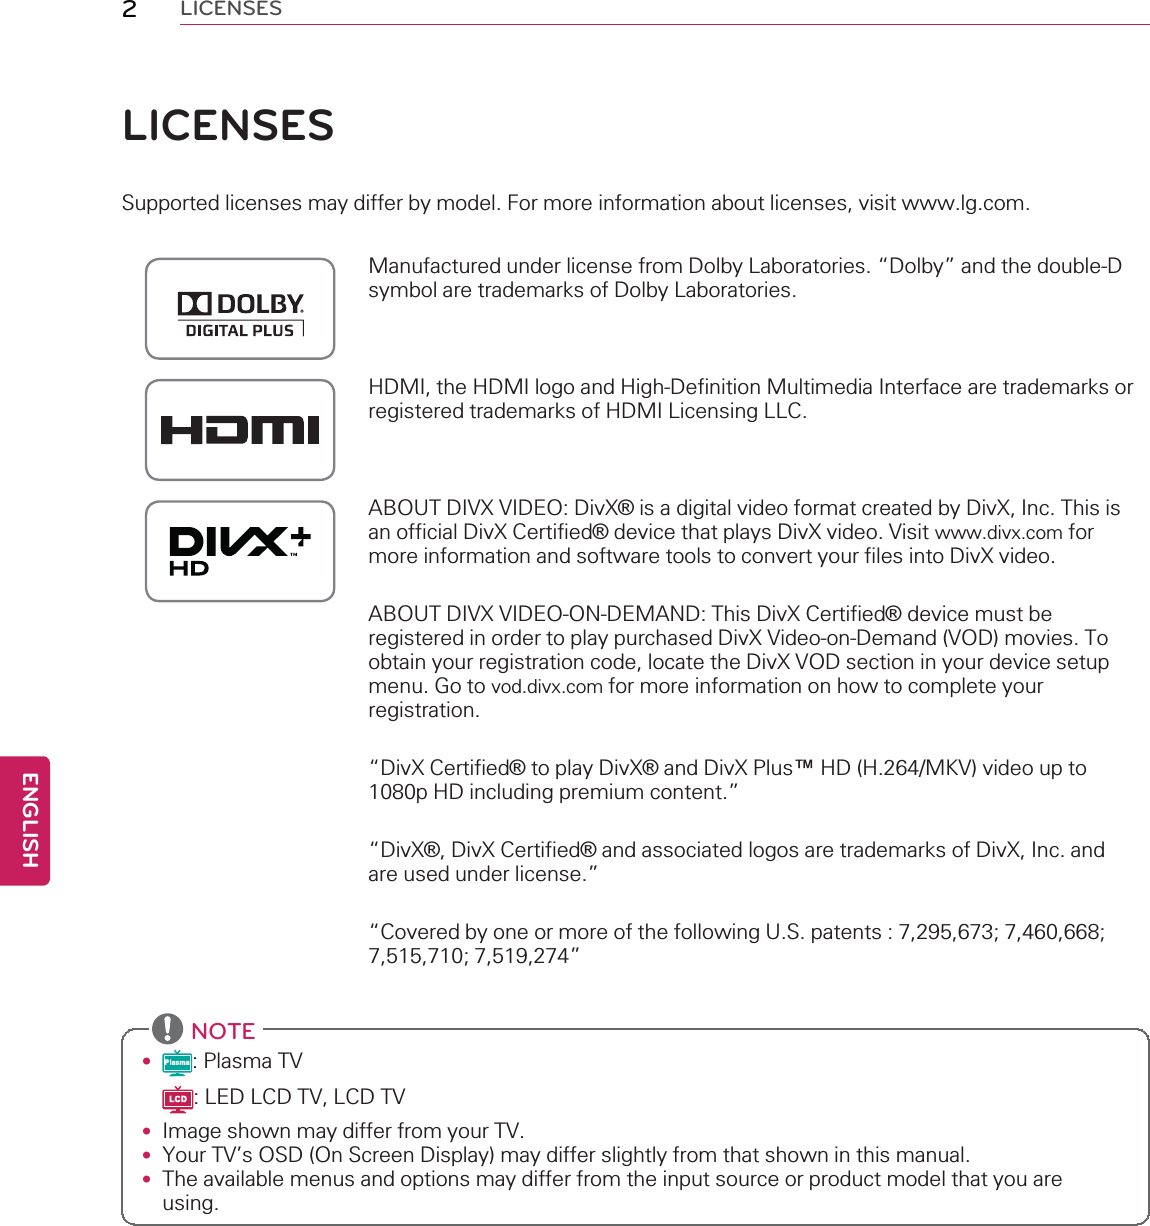 2LICENSESLICENSESSupported licenses may differ by model. For more information about licenses, visit www.lg.com.Manufactured under license from Dolby Laboratories. “Dolby”and the double-Dsymbol are trademarks of Dolby Laboratories.HDMI, the HDMI logo and High-Definition Multimedia Interface are trademarks orregistered trademarks of HDMI Licensing LLC.ABOUT DIVX VIDEO: DivX®is a digital video format created by DivX, Inc. This isan official DivX Certified®device that plays DivX video. Visit www.divx.com formore information and software tools to convert your files into DivX video.ABOUT DIVX VIDEO-ON-DEMAND: This DivX Certified®device must beregistered in order to play purchased DivX Video-on-Demand (VOD) movies. Toobtain your registration code, locate the DivX VOD section in your device setupmenu. Go to vod.divx.com for more information on how to complete yourregistration.“DivX Certified®to play DivX®and DivX Plus™HD (H.264/MKV) video up to1080p HD including premium content.”“DivX®, DivX Certified®and associated logos are trademarks of DivX, Inc. andare used under license.”“Covered by one or more of the following U.S. patents : 7,295,673; 7,460,668;7,515,710; 7,519,274”NOTE•: Plasma TV: LED LCD TV, LCD TV•Image shown may differ from your TV.•Your TV’s OSD (On Screen Display) may differ slightly from that shown in this manual.•The available menus and options may differ from the input source or product model that you areusing.ENGLISH